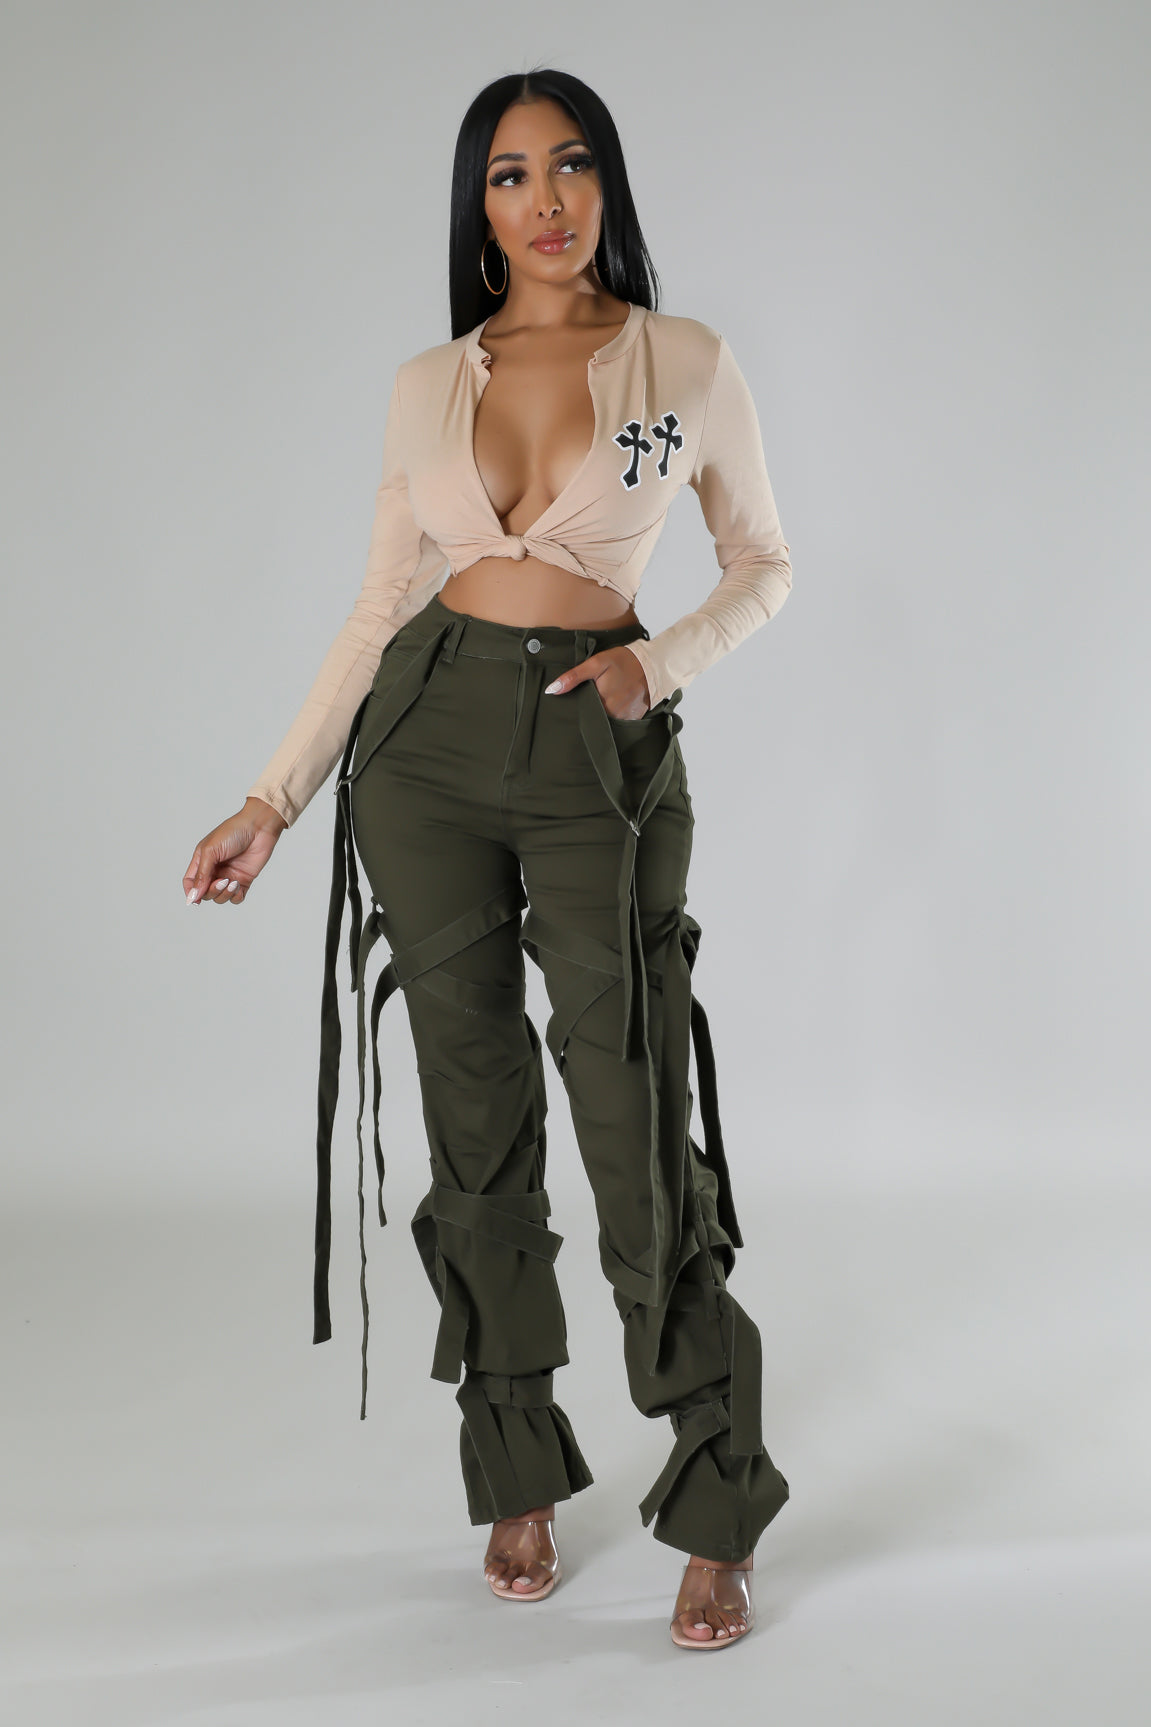 Tied Up Strappy Stretch Pants - Olive – Gabby Madison at DTT by L. Green